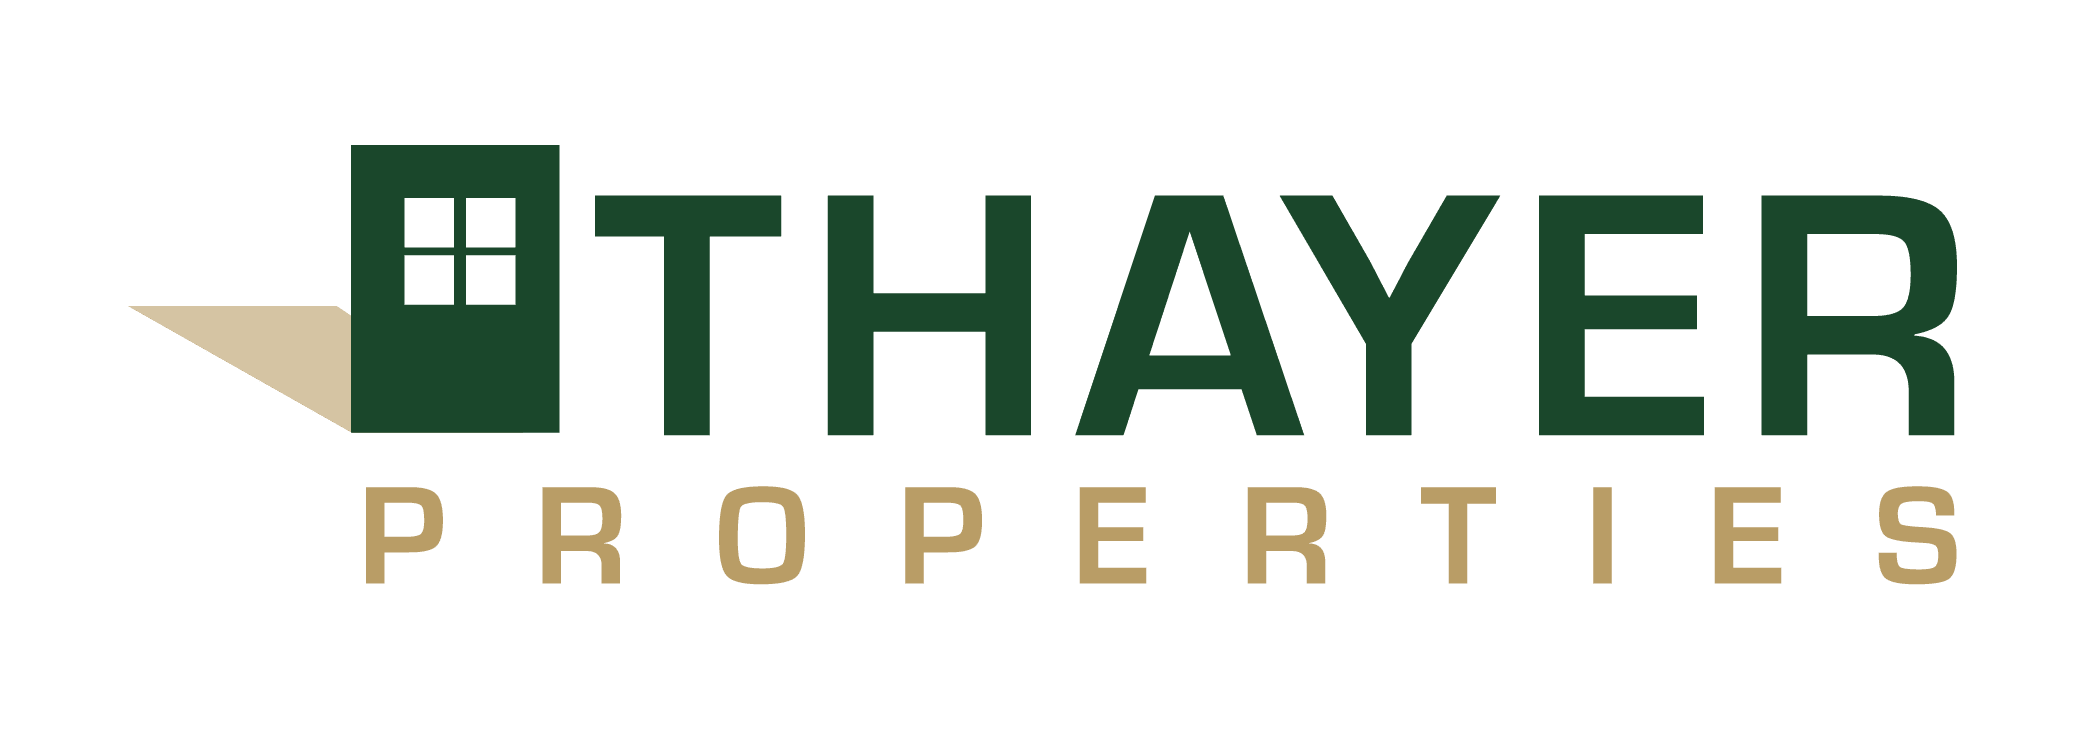 Corporate logo for J.P. Thayer